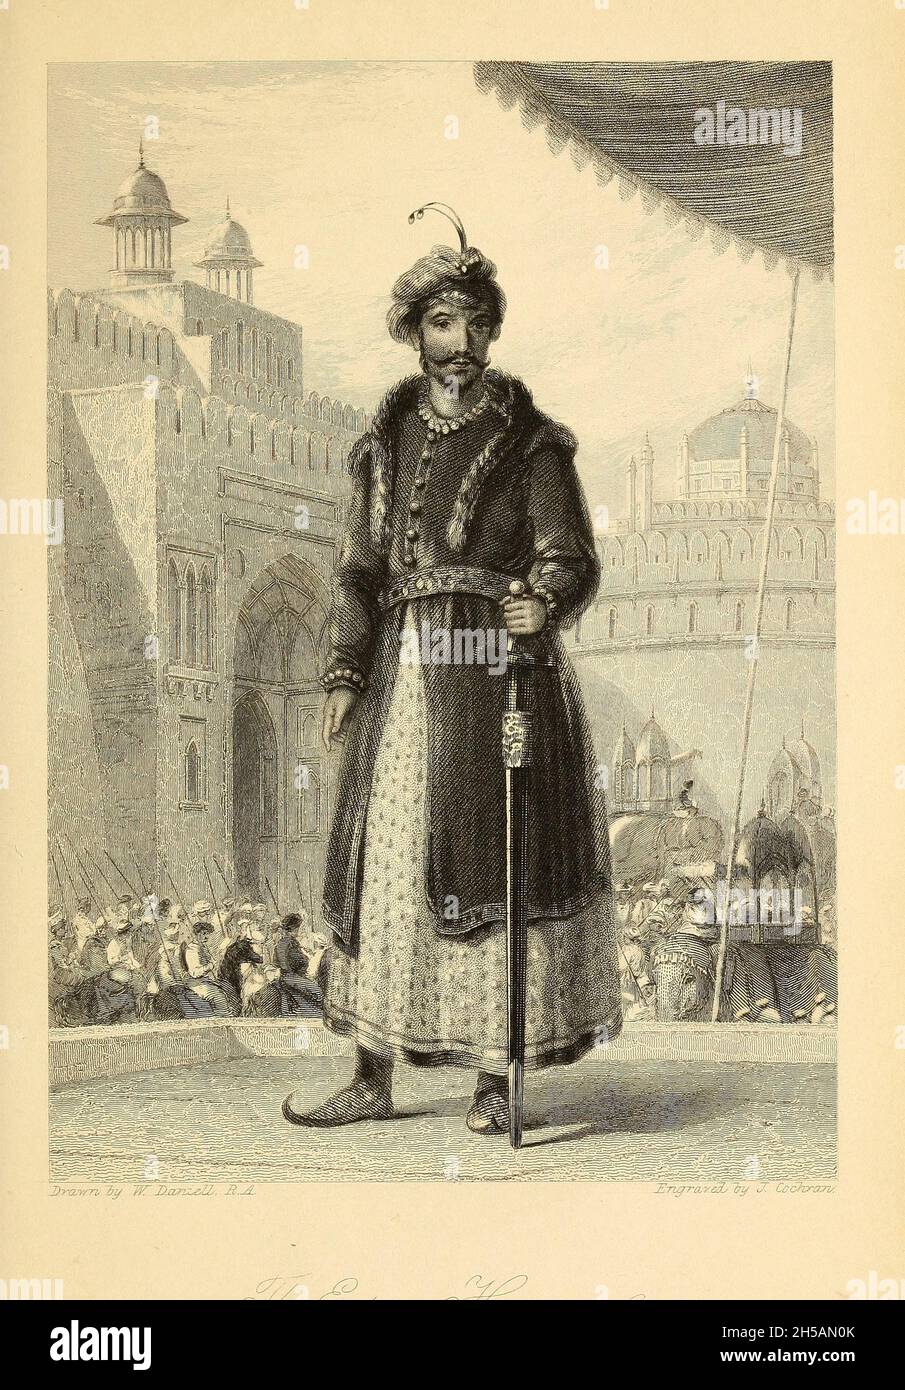 The Emperor Humayoon [Nasir-ud-Din Muḥammad (Persian: romanized: Nasīr-ad-Dīn Muhammad; 6 March 1508 – 27 January 1556), better known by his regnal name, Humayun (Persian: همایون, romanized: Humāyūn), was the second emperor of the Mughal Empire, who ruled over territory in what is now Afghanistan, Pakistan, Northern India, and Bangladesh from 1530 to 1540 and again from 1555 to 1556. Like his father, Babur, he lost his kingdom early but regained it with the aid of the Safavid dynasty of Persia, with additional territory. At the time of his death in 1556, the Mughal Empire spanned almost one m Stock Photo